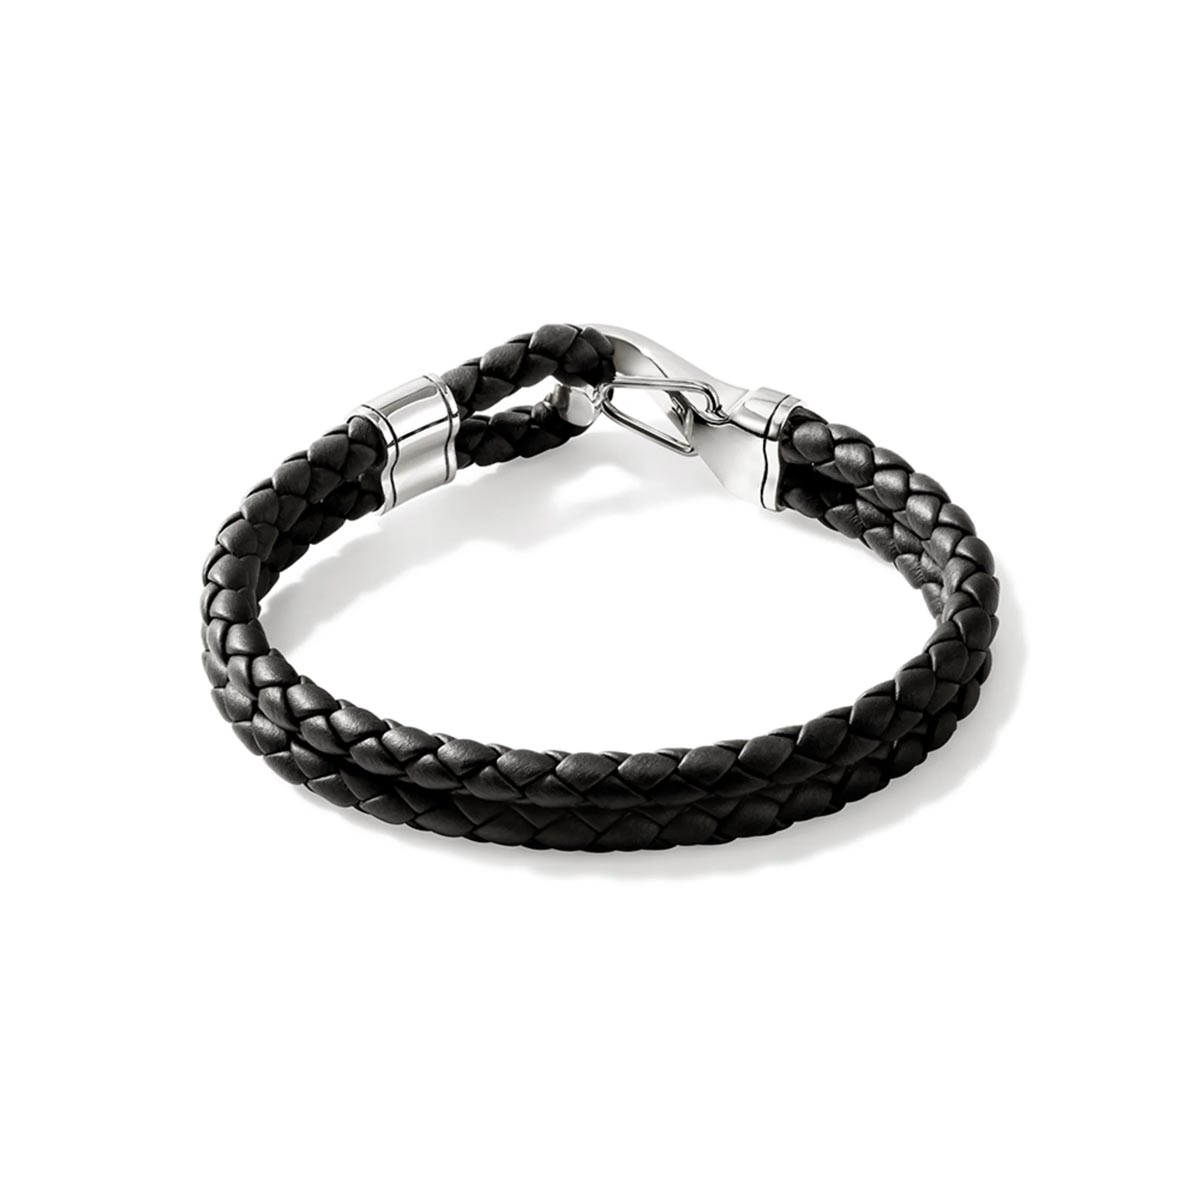 John Hardy Mens Double Row Hook Clasp Bracelet in Sterling Silver and Black Leather Cord